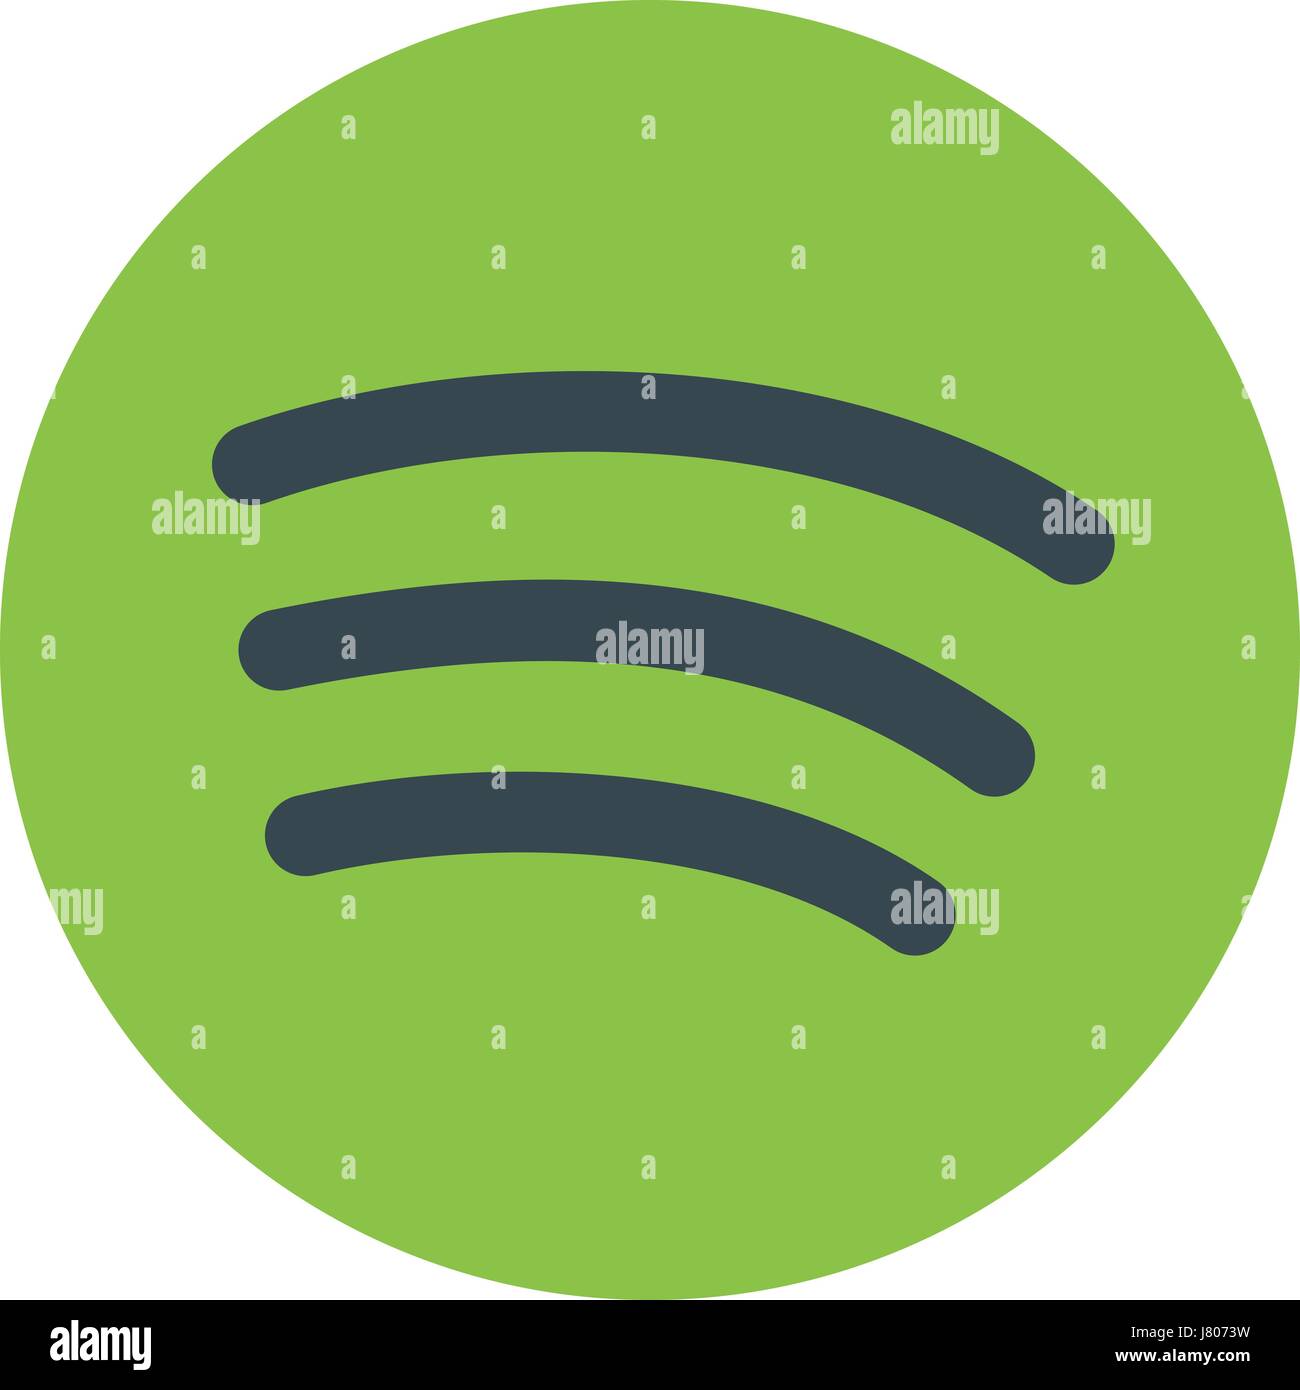 Spotify logo Stock Vector Images - Alamy